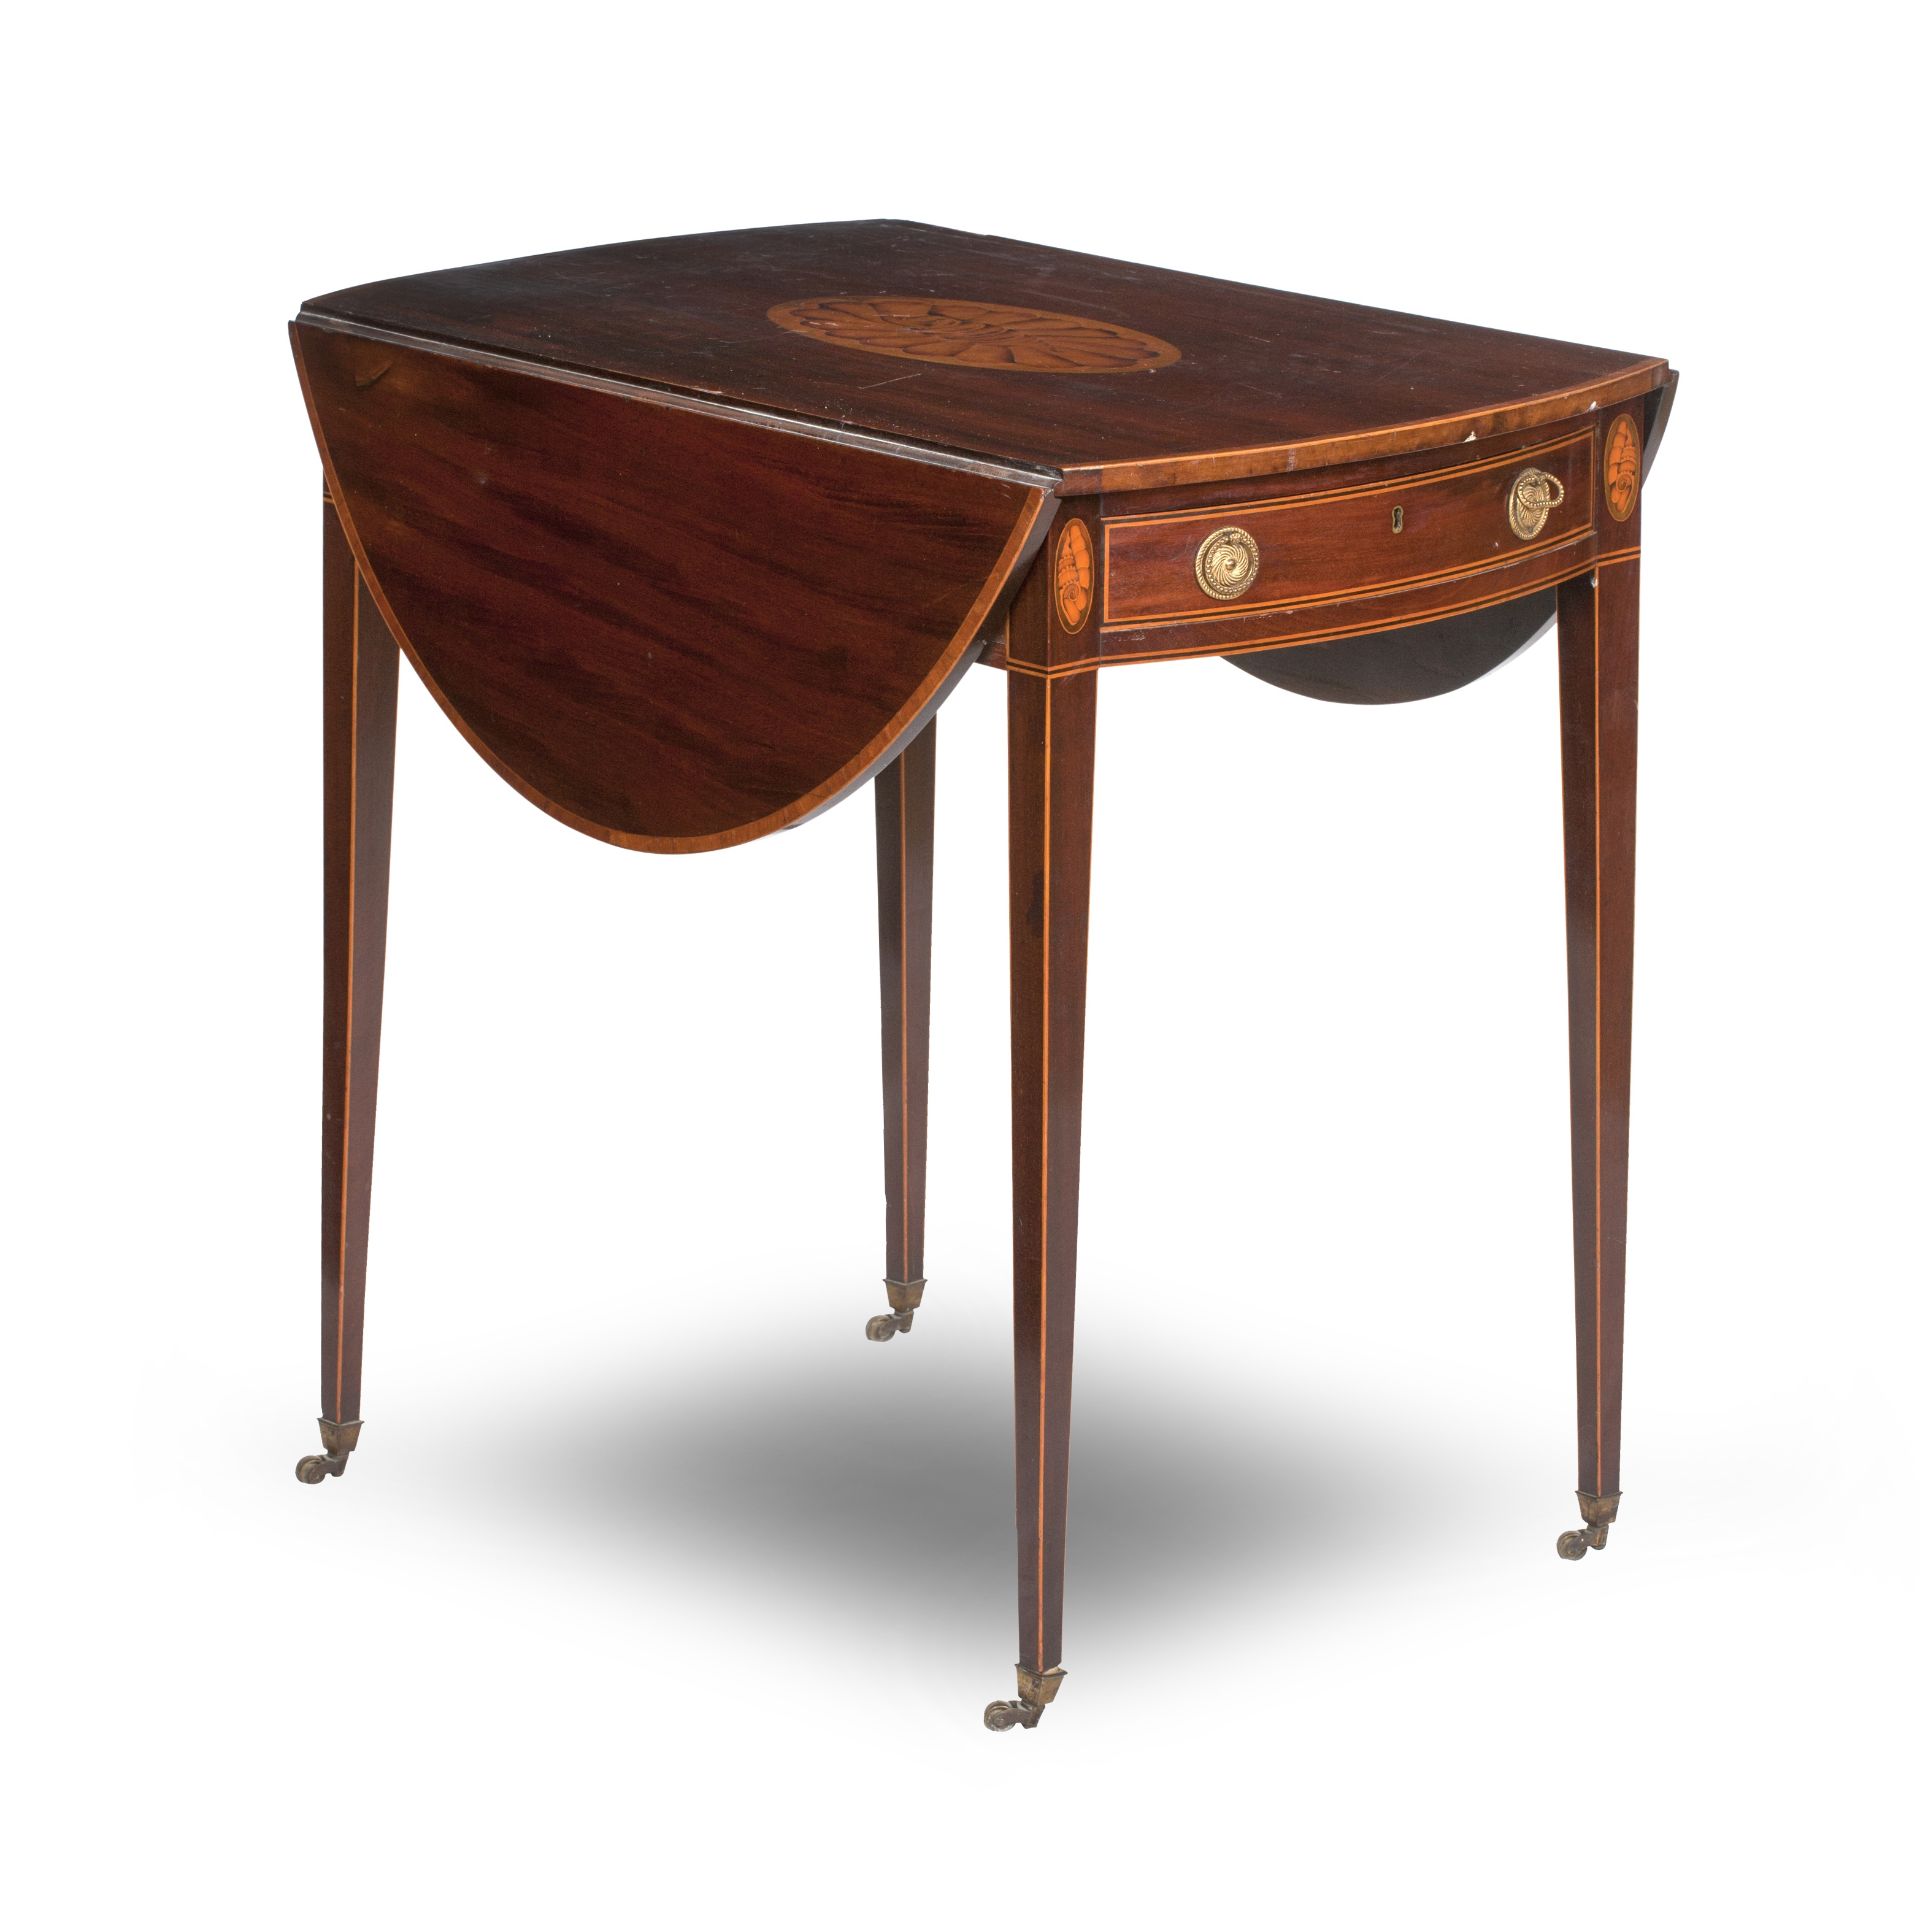 A George III mahogany and marquetry Pembroke table